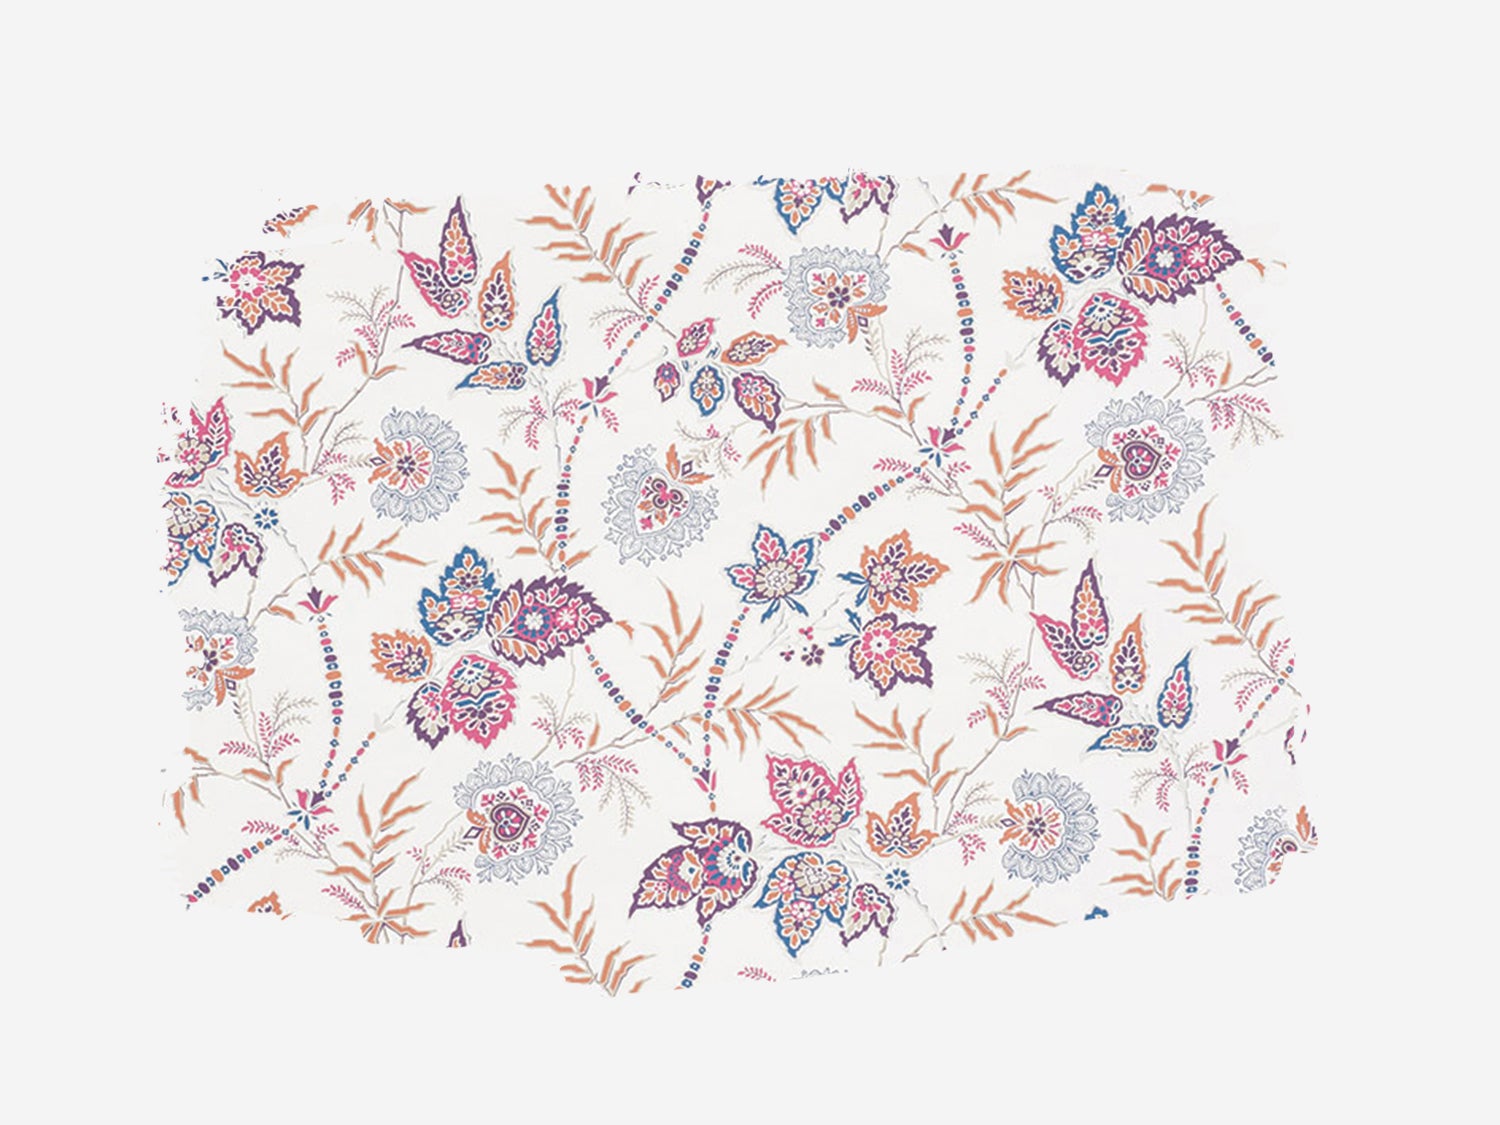 Floral Wallpaper Might Not Be Groundbreaking for Spring, But We Love It Anyway